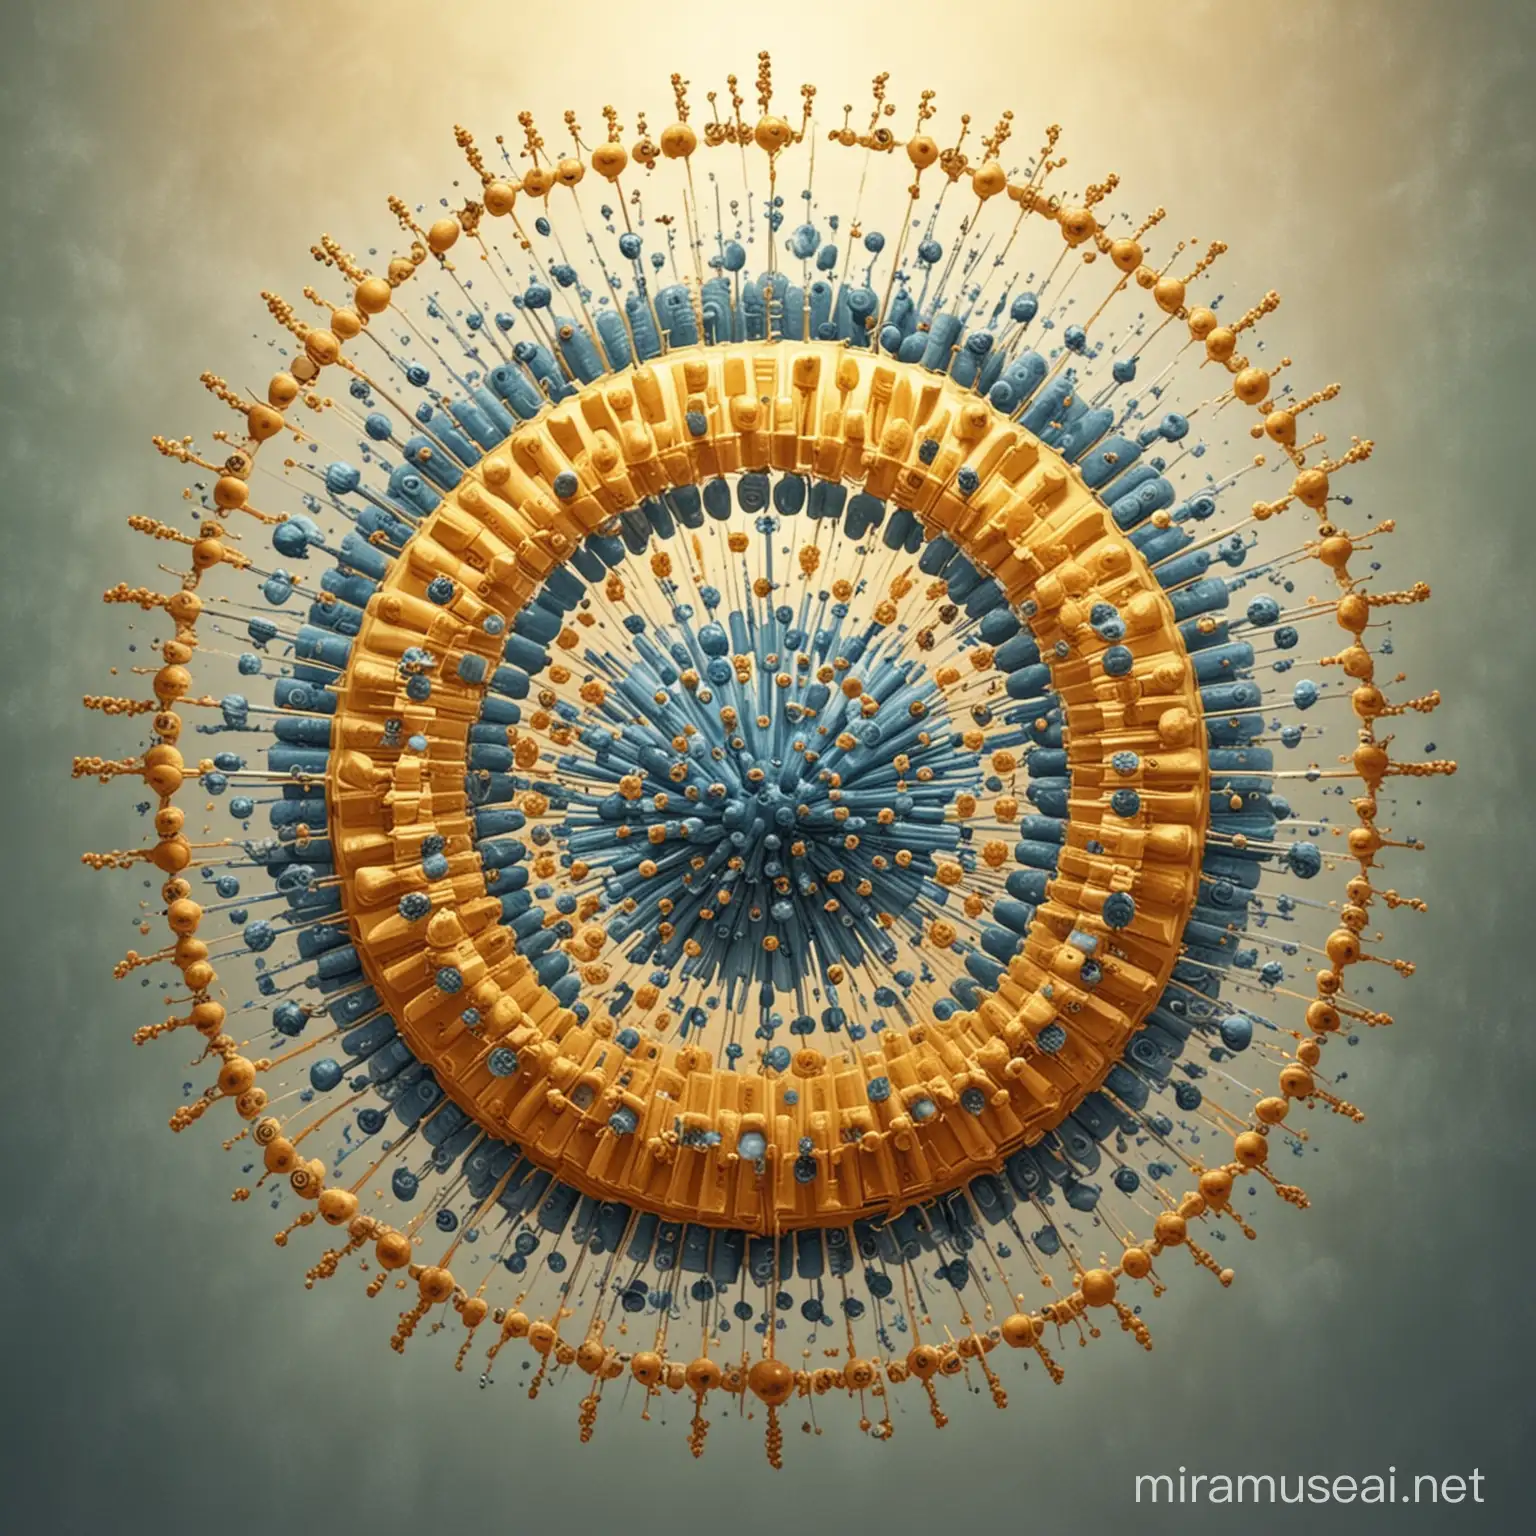 corona viruses radiating from a concentric source conveying a feeling of happiness and anticipation